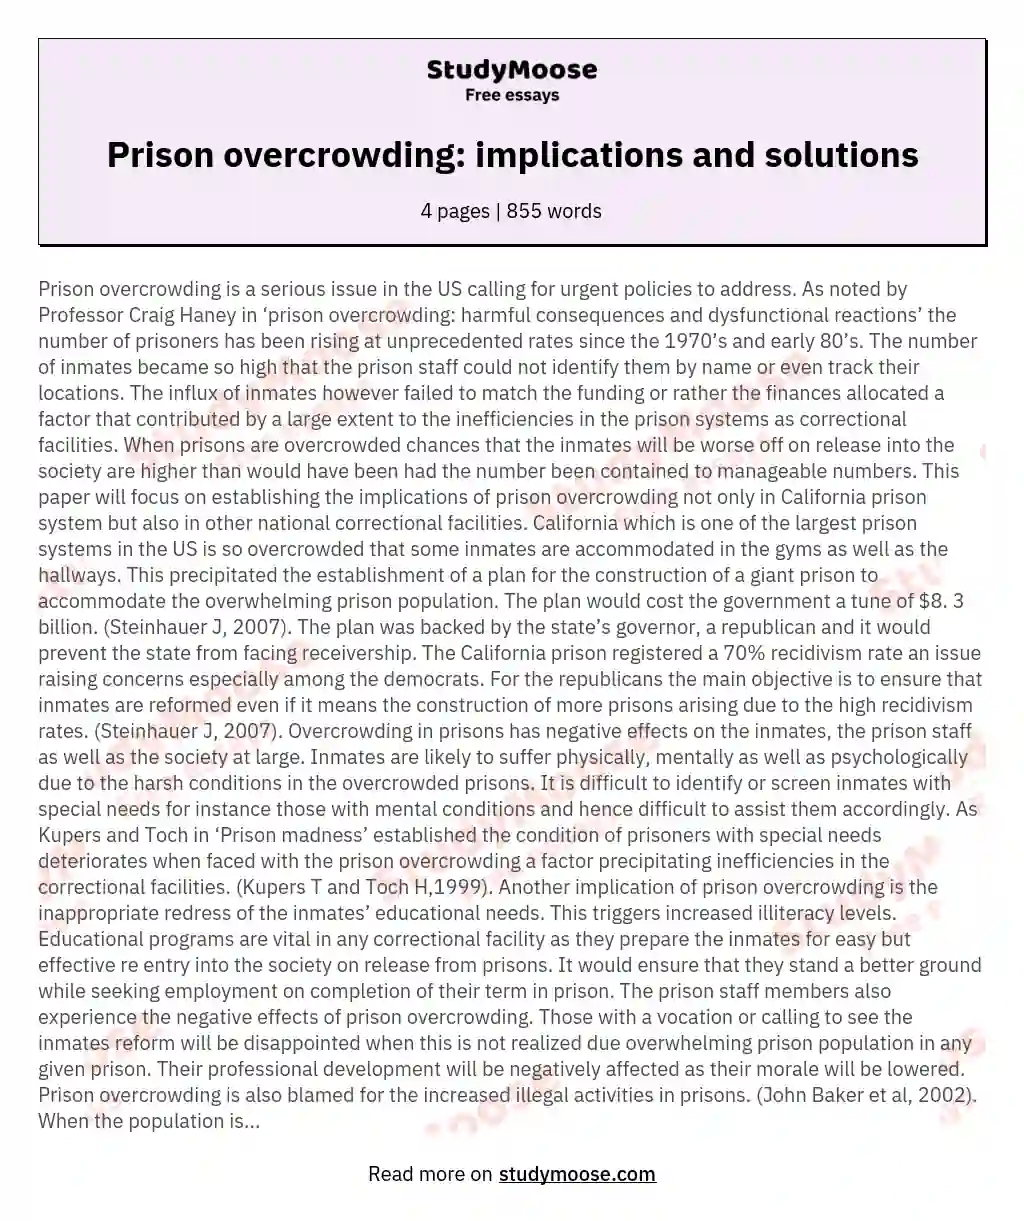 What are the implications of prison overcrowding and are more prisons the answer?